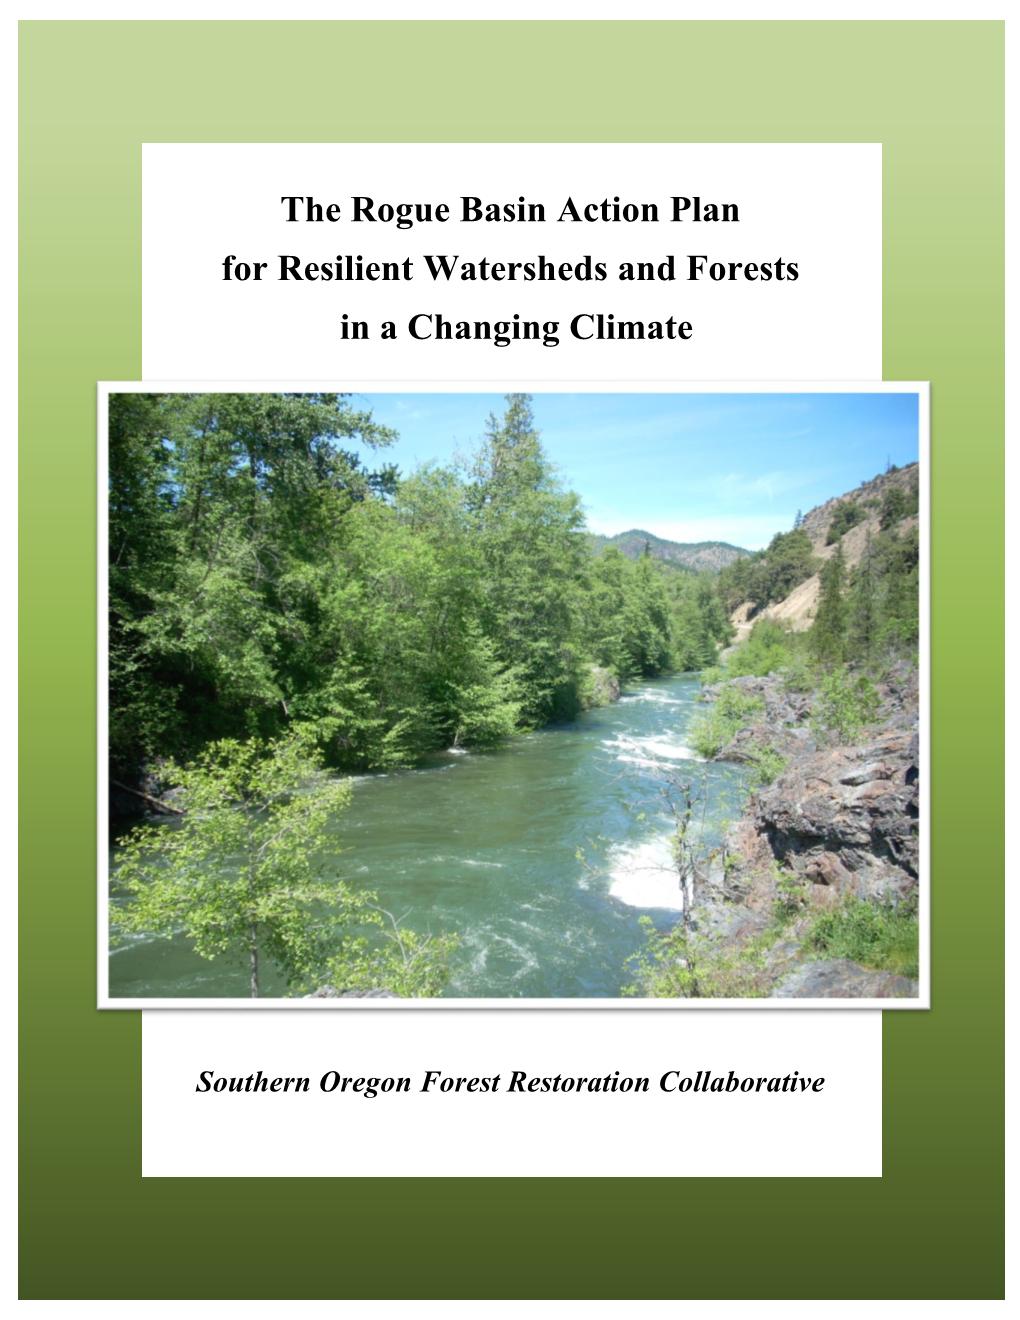 The Rogue Basin Action Plan for Resilient Watersheds and Forests in a Changing Climate